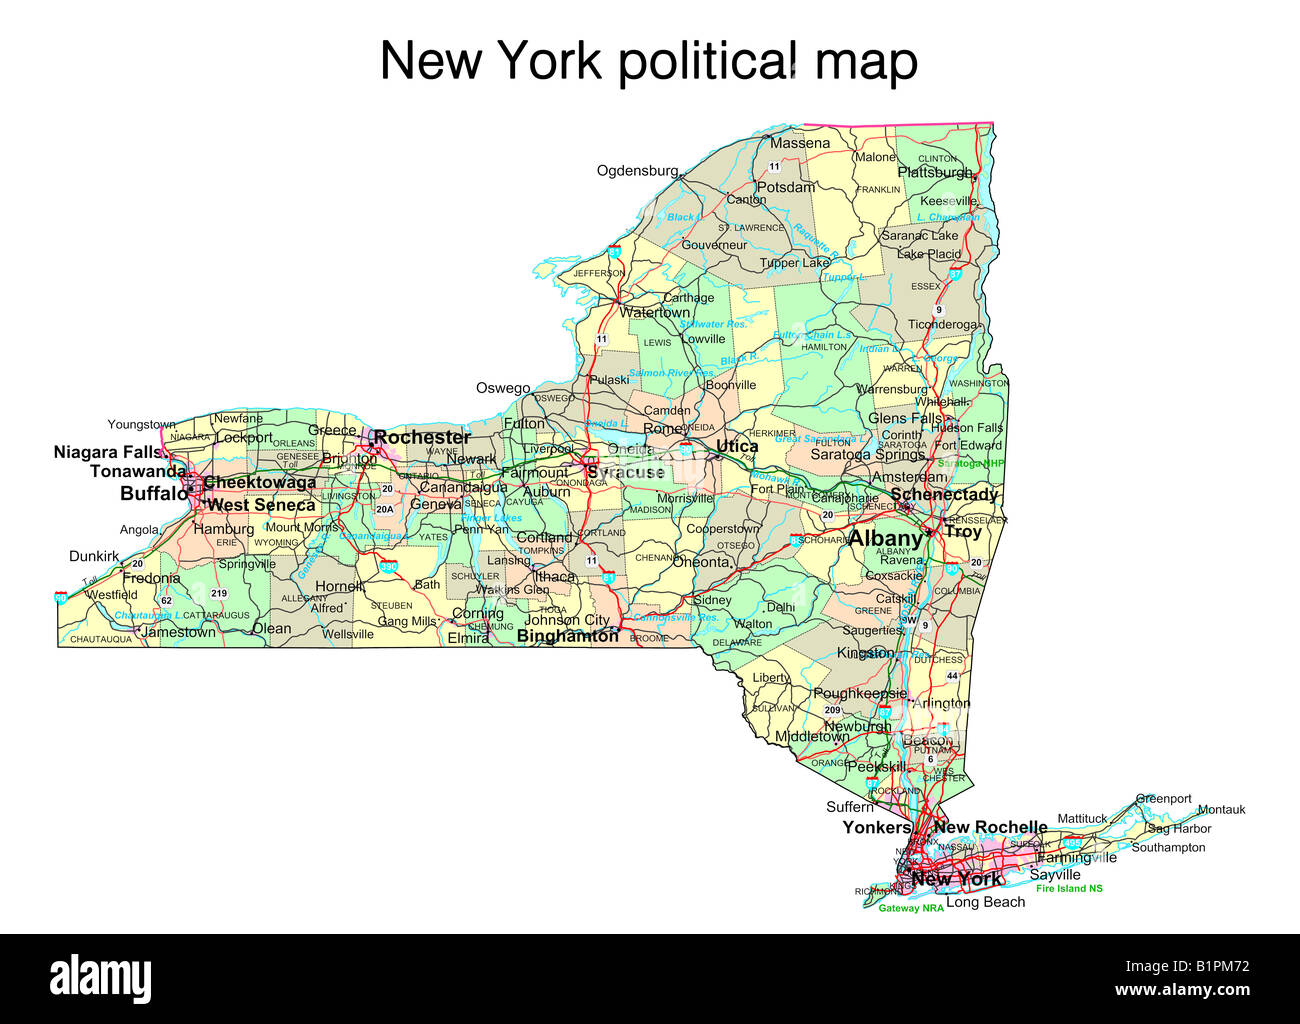 New York state political map Stock Photo